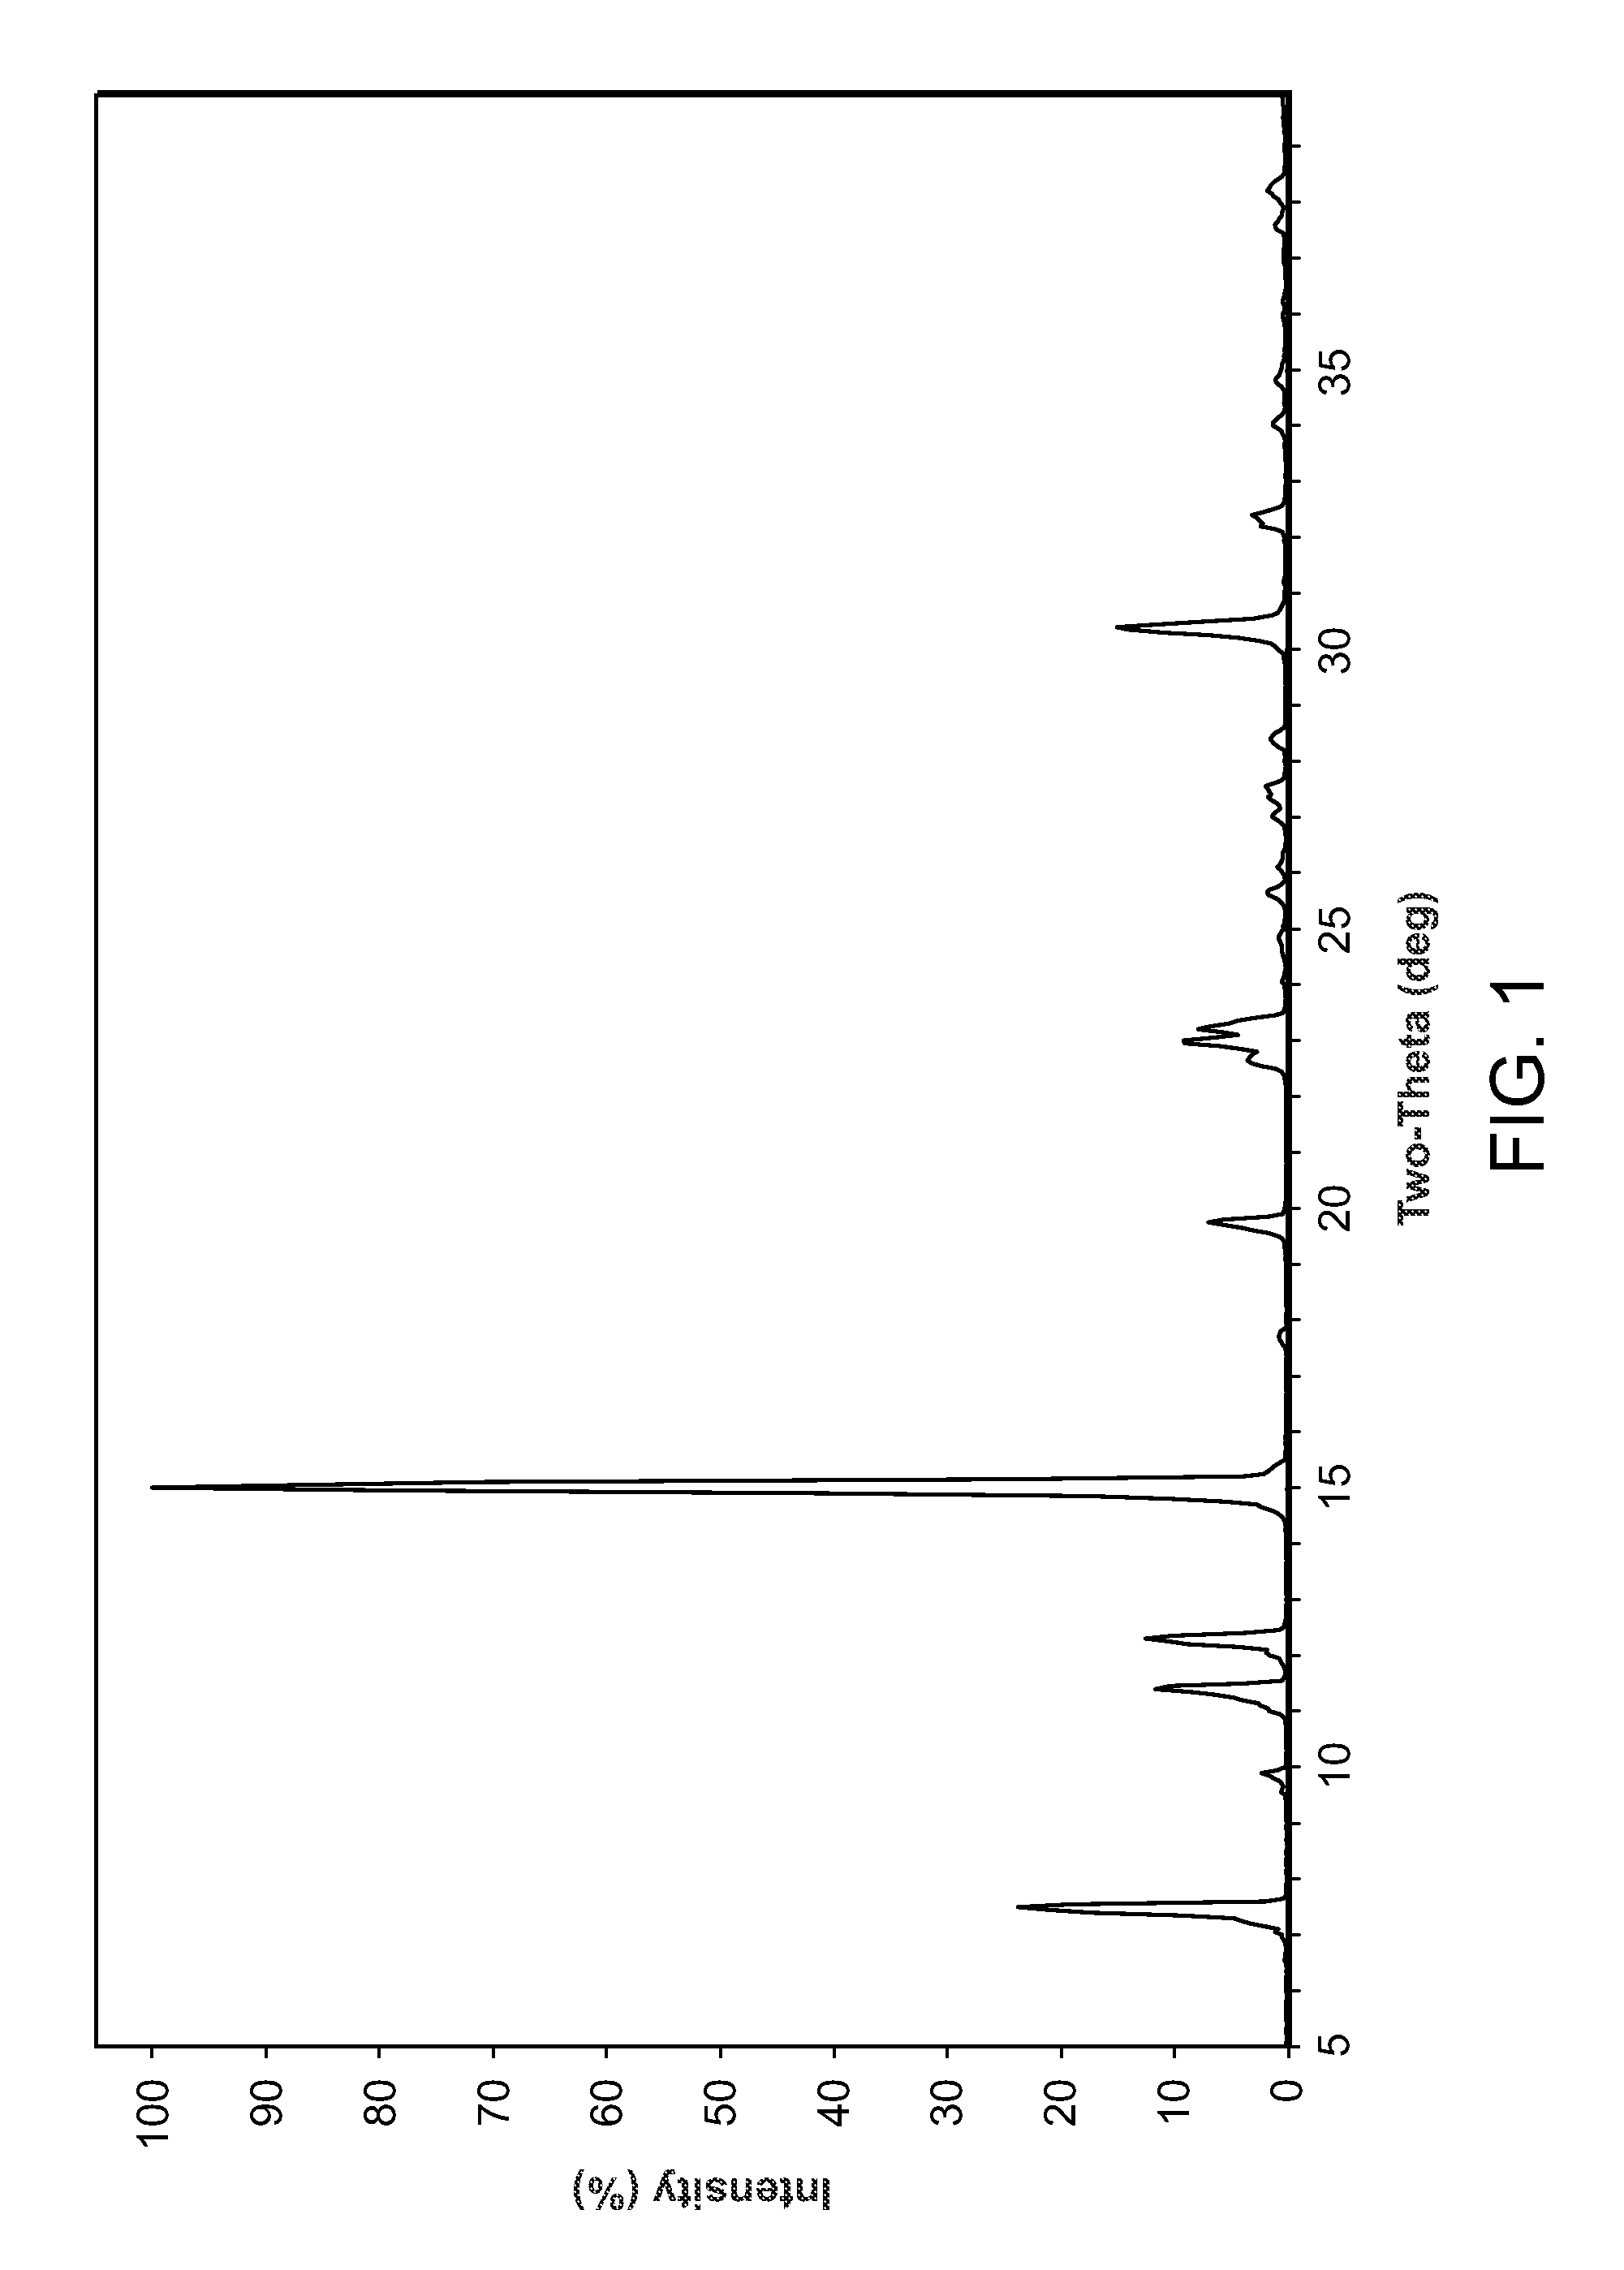 Novel compounds and compositions for targeting cancer stem cells